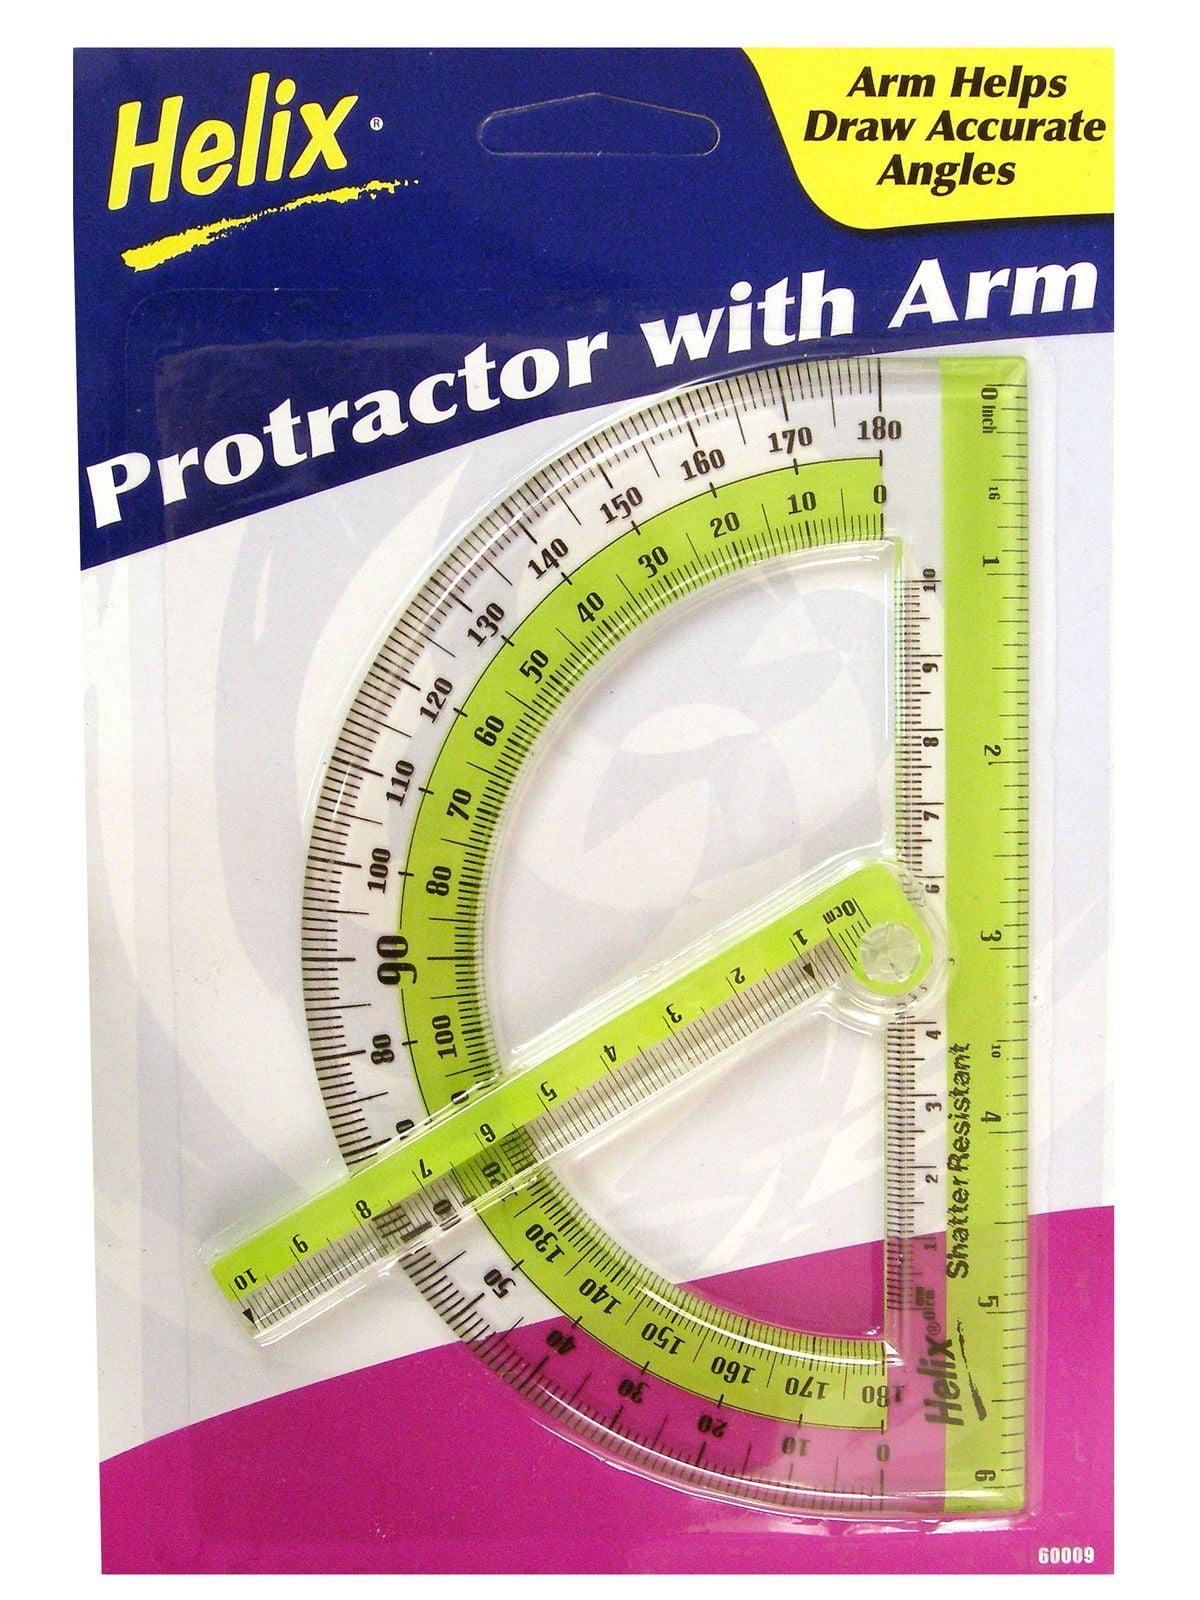 Protractor with Swing Arm protractor (pack of 12) 